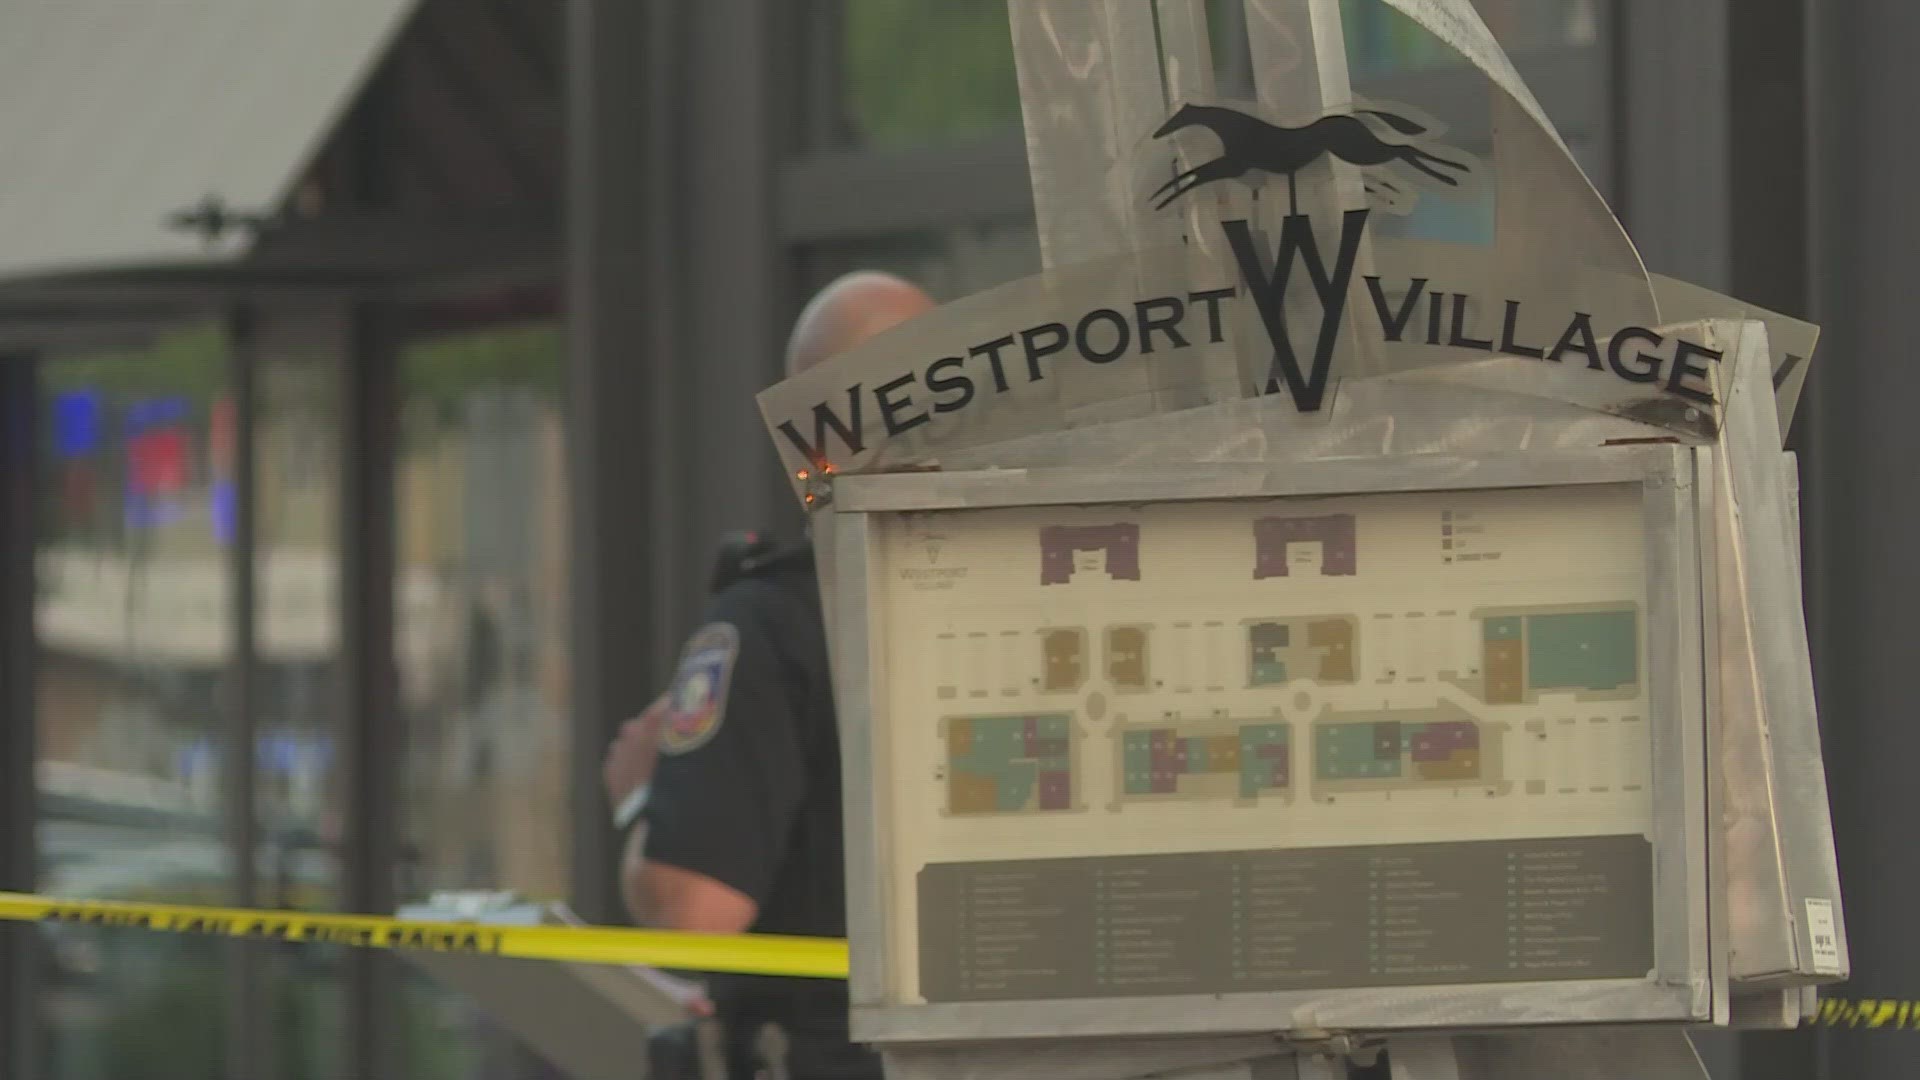 35-year-old Ashley Yates was shot outside a store in Westport Village on Friday.